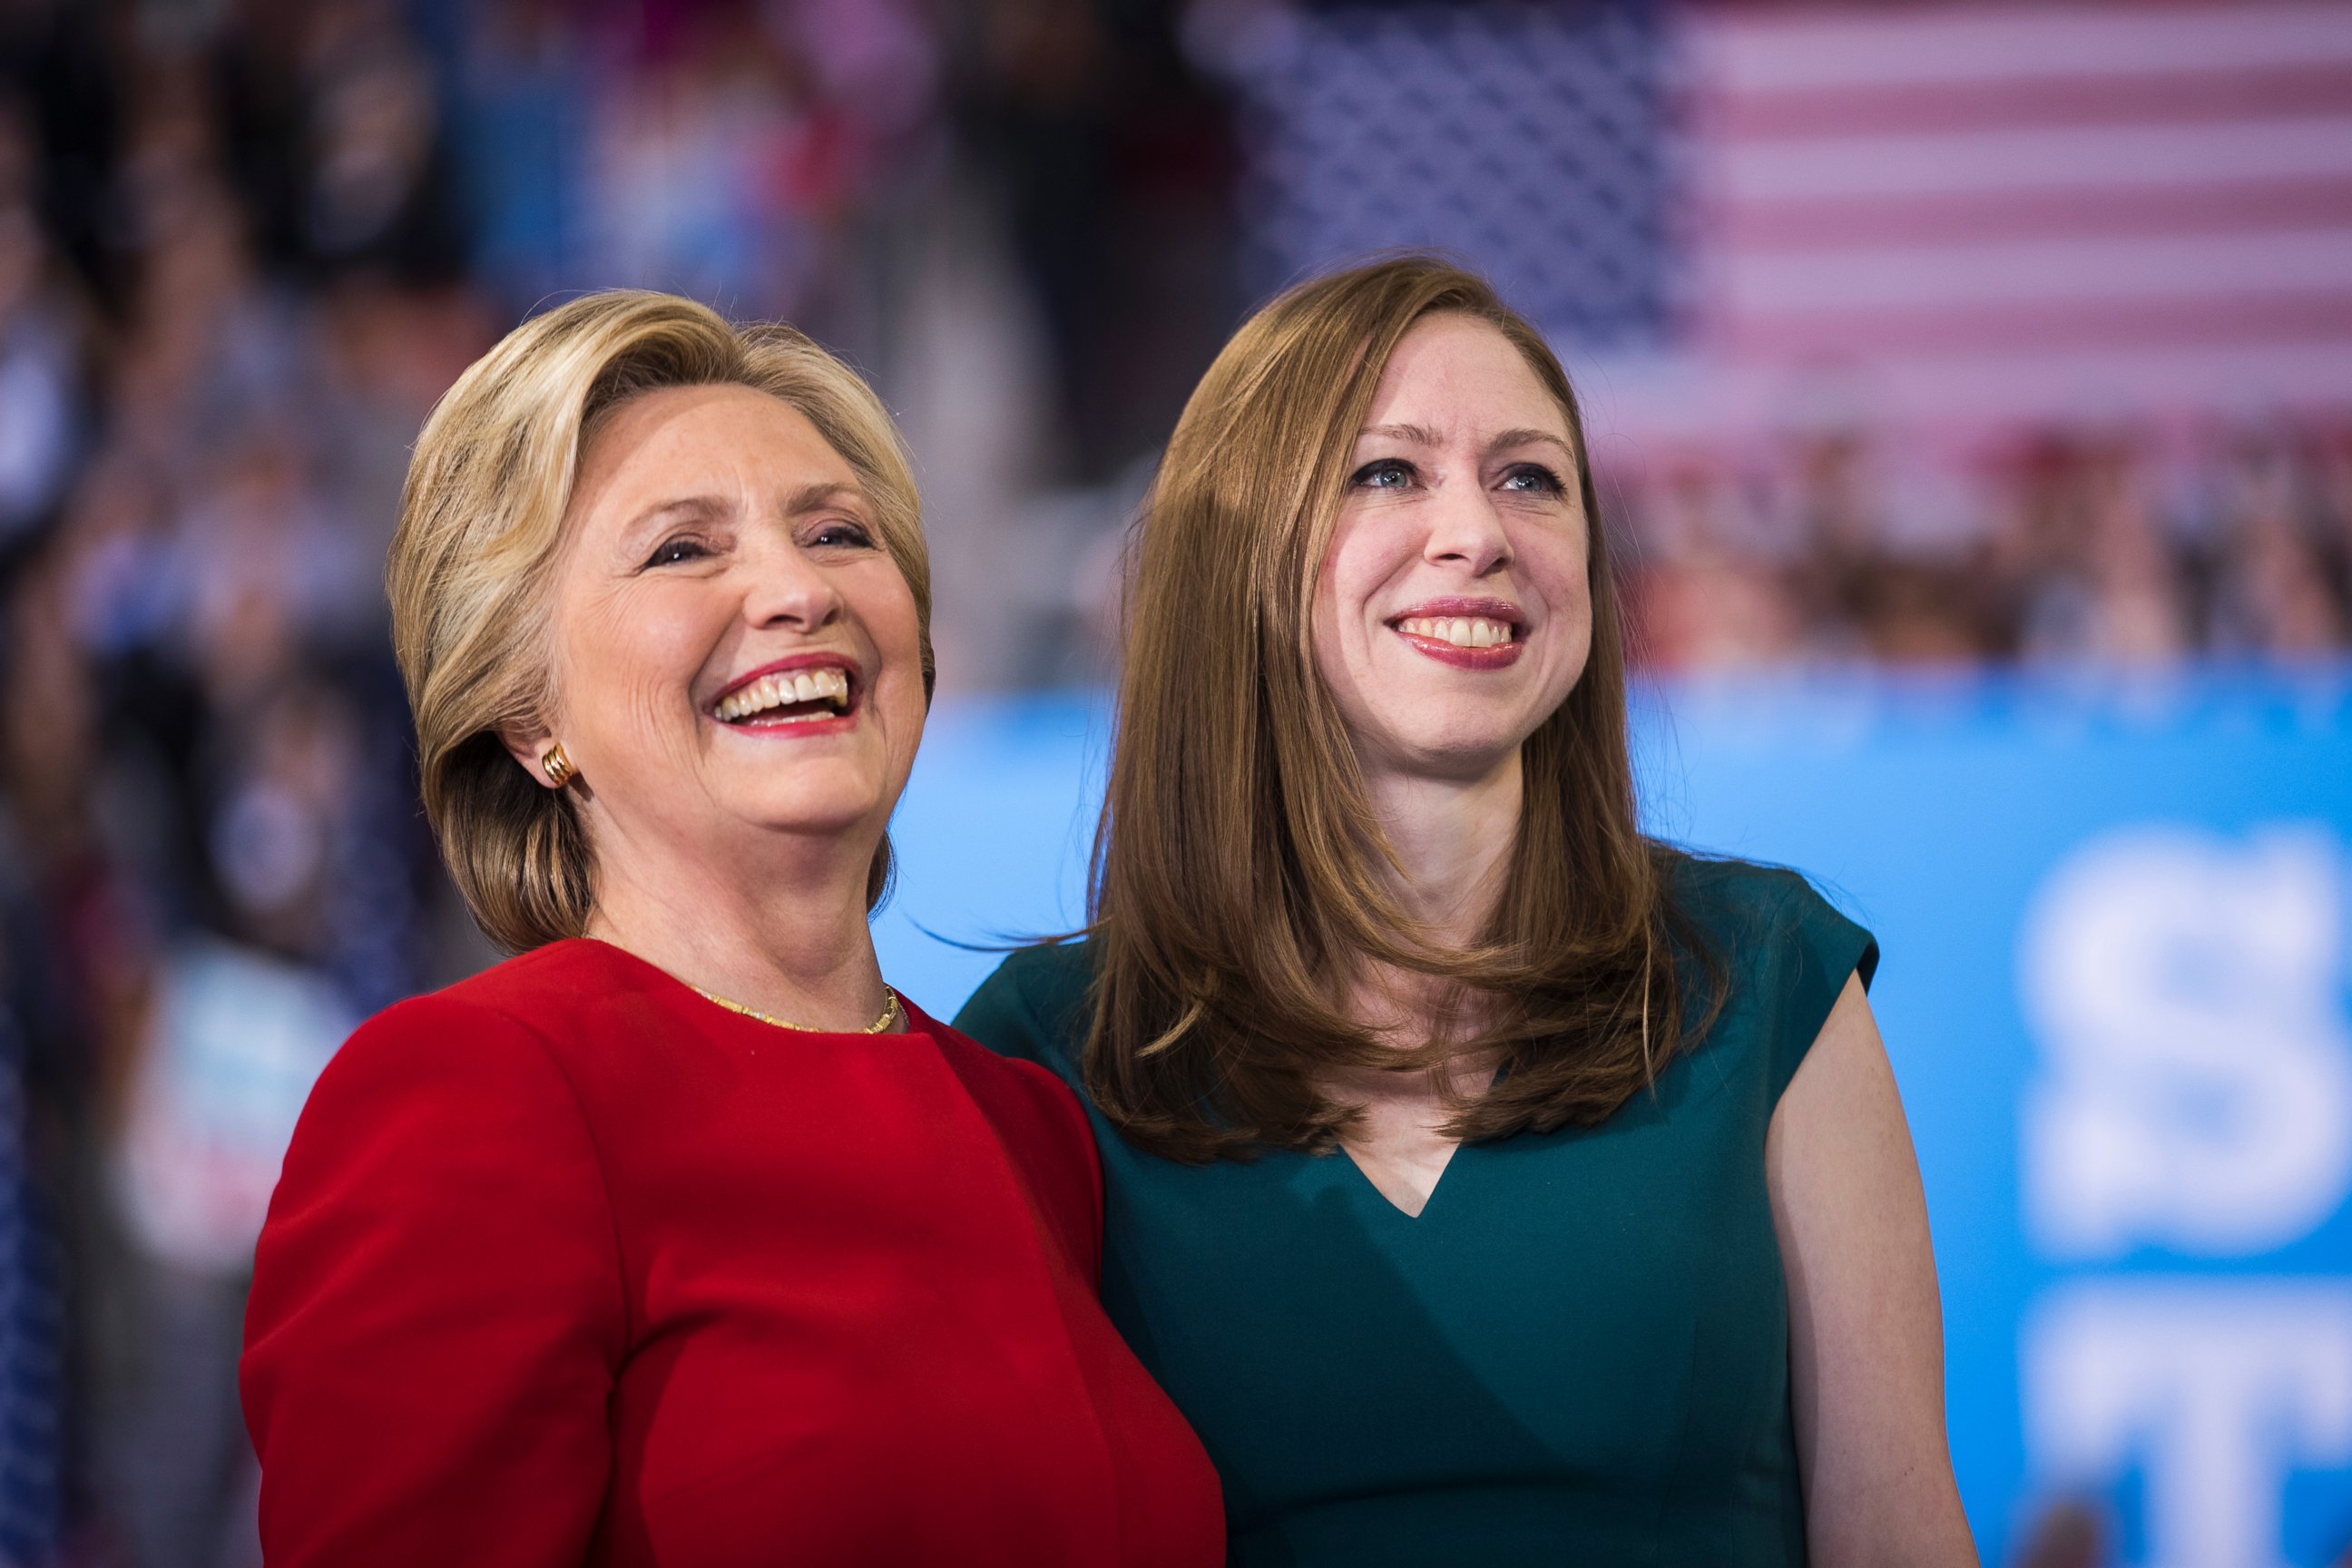 PHOTO: Democratic presidential nominee Hillary Clinton with her daughter Chelsea Clinton at a rally, Nov. 8, 2016, in Raleigh, N.C.